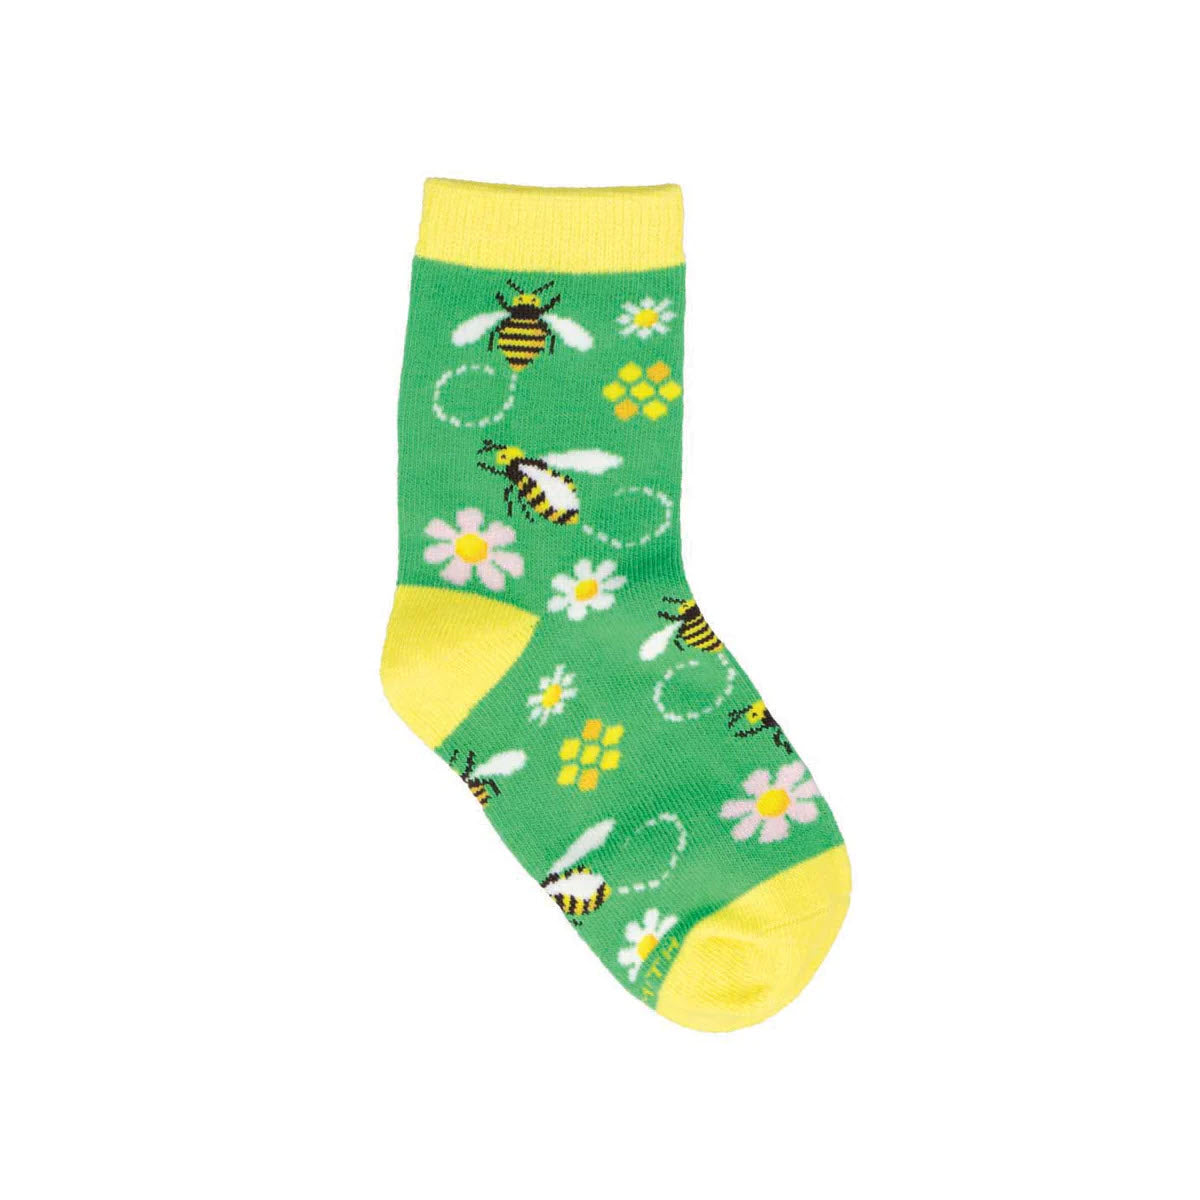 A single SOCKSMITH MIND YOUR BZZNESS CREW SOCKS GREEN - KIDS with a pattern of bees, daisies, and bubbles, featuring a yellow toe and heel, isolated on a white background.